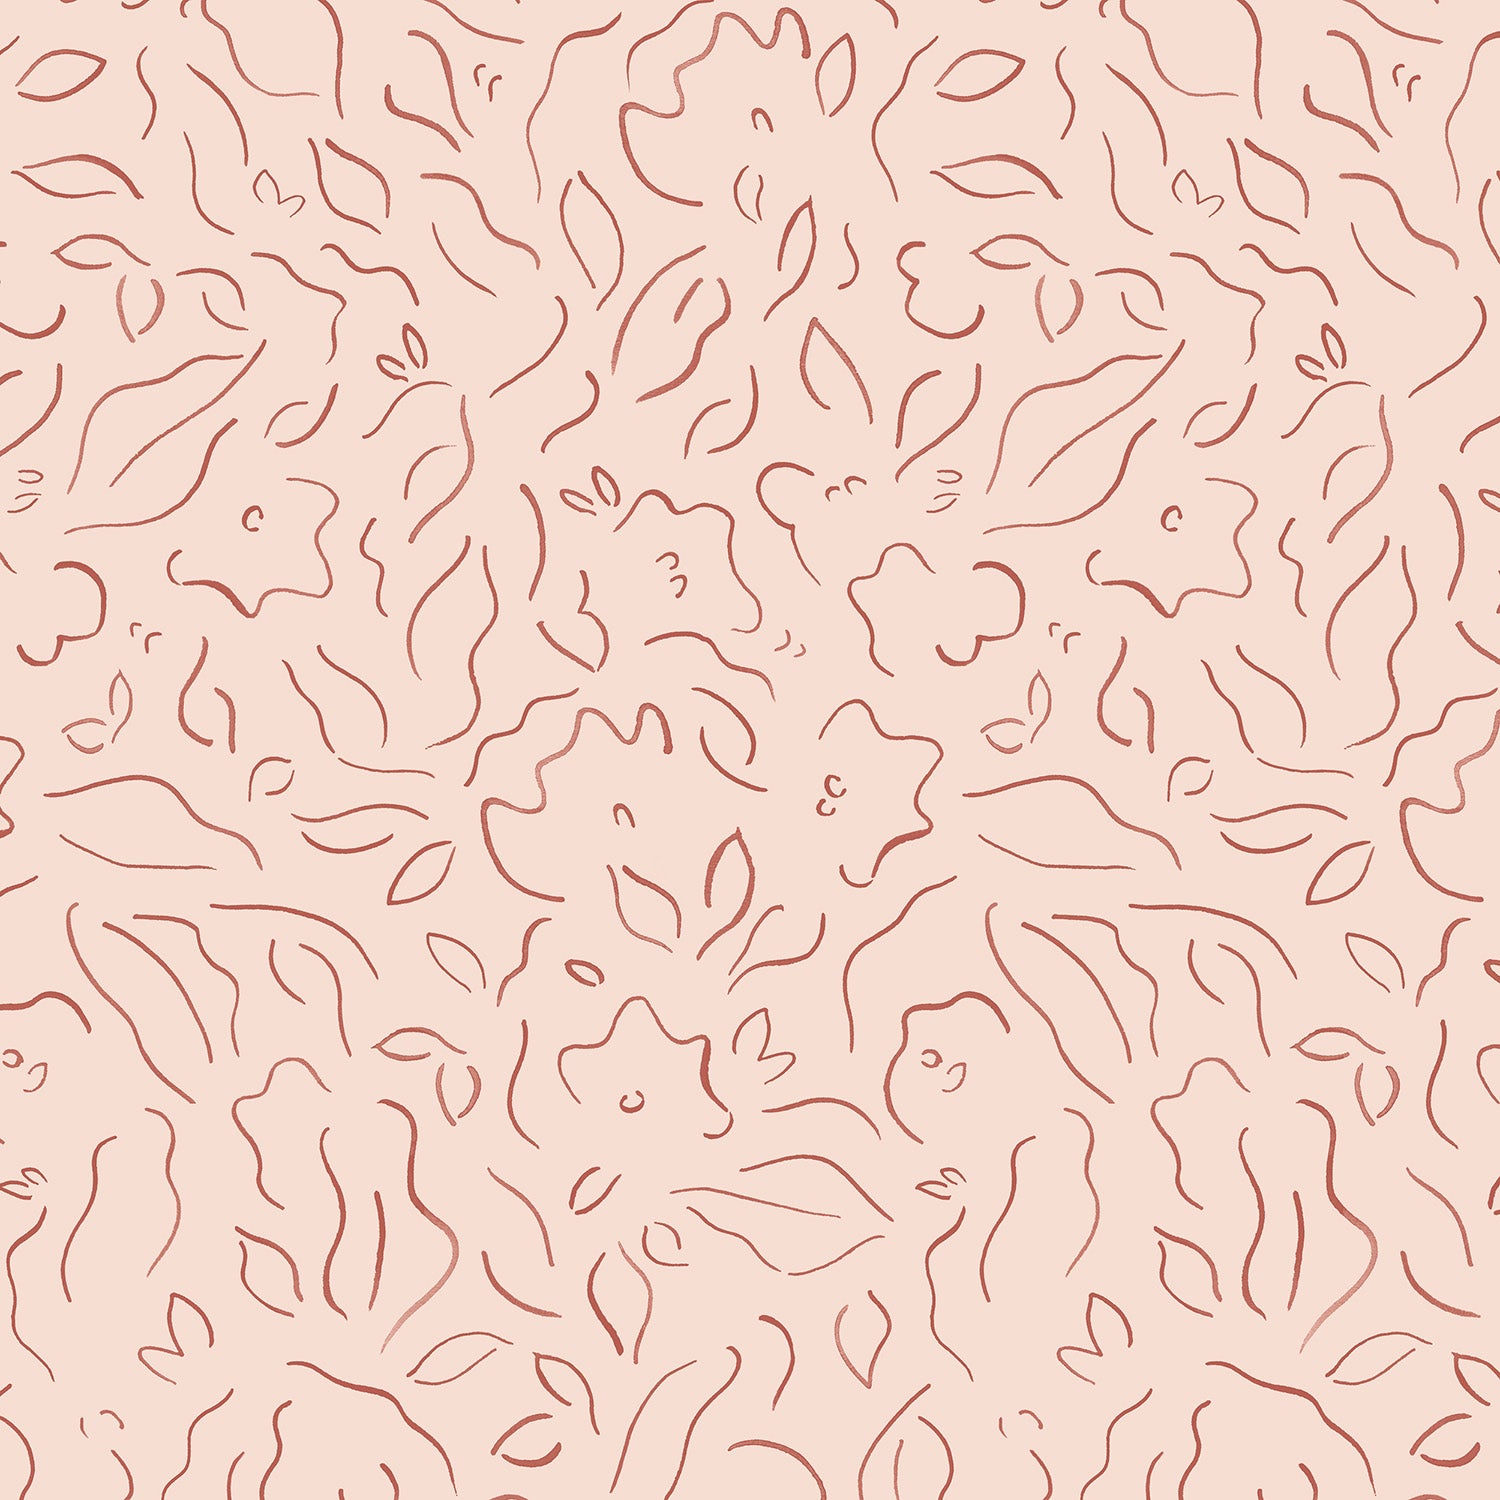 Detail of wallpaper in a minimalist floral print in red on a light pink field.